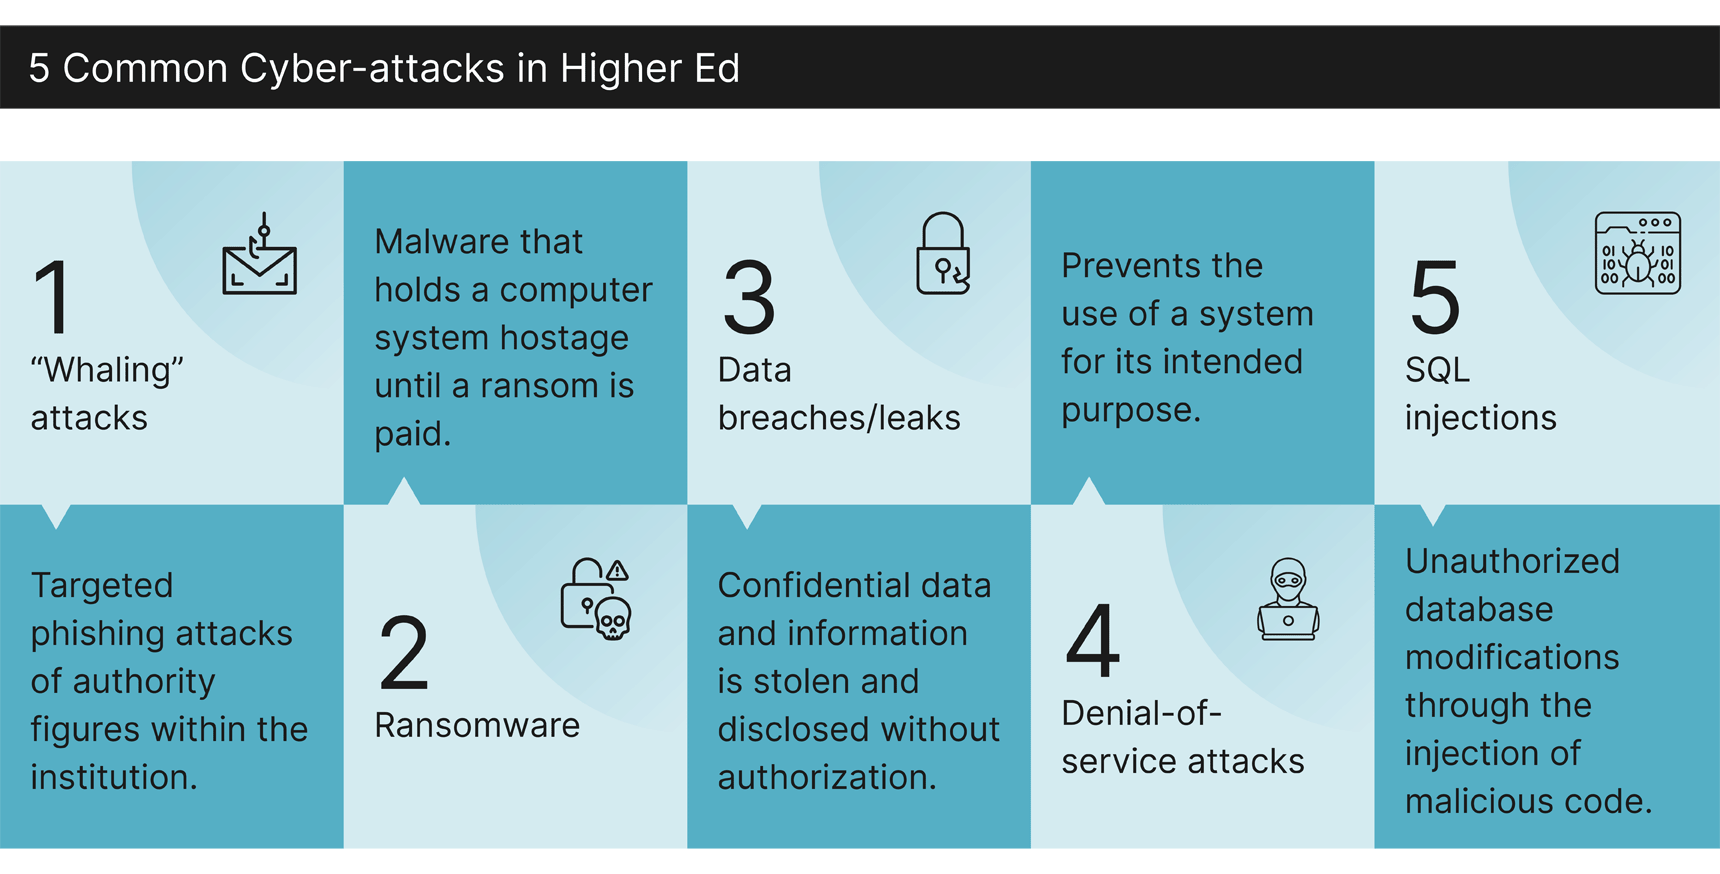 5 common cyber-attacks in higher education